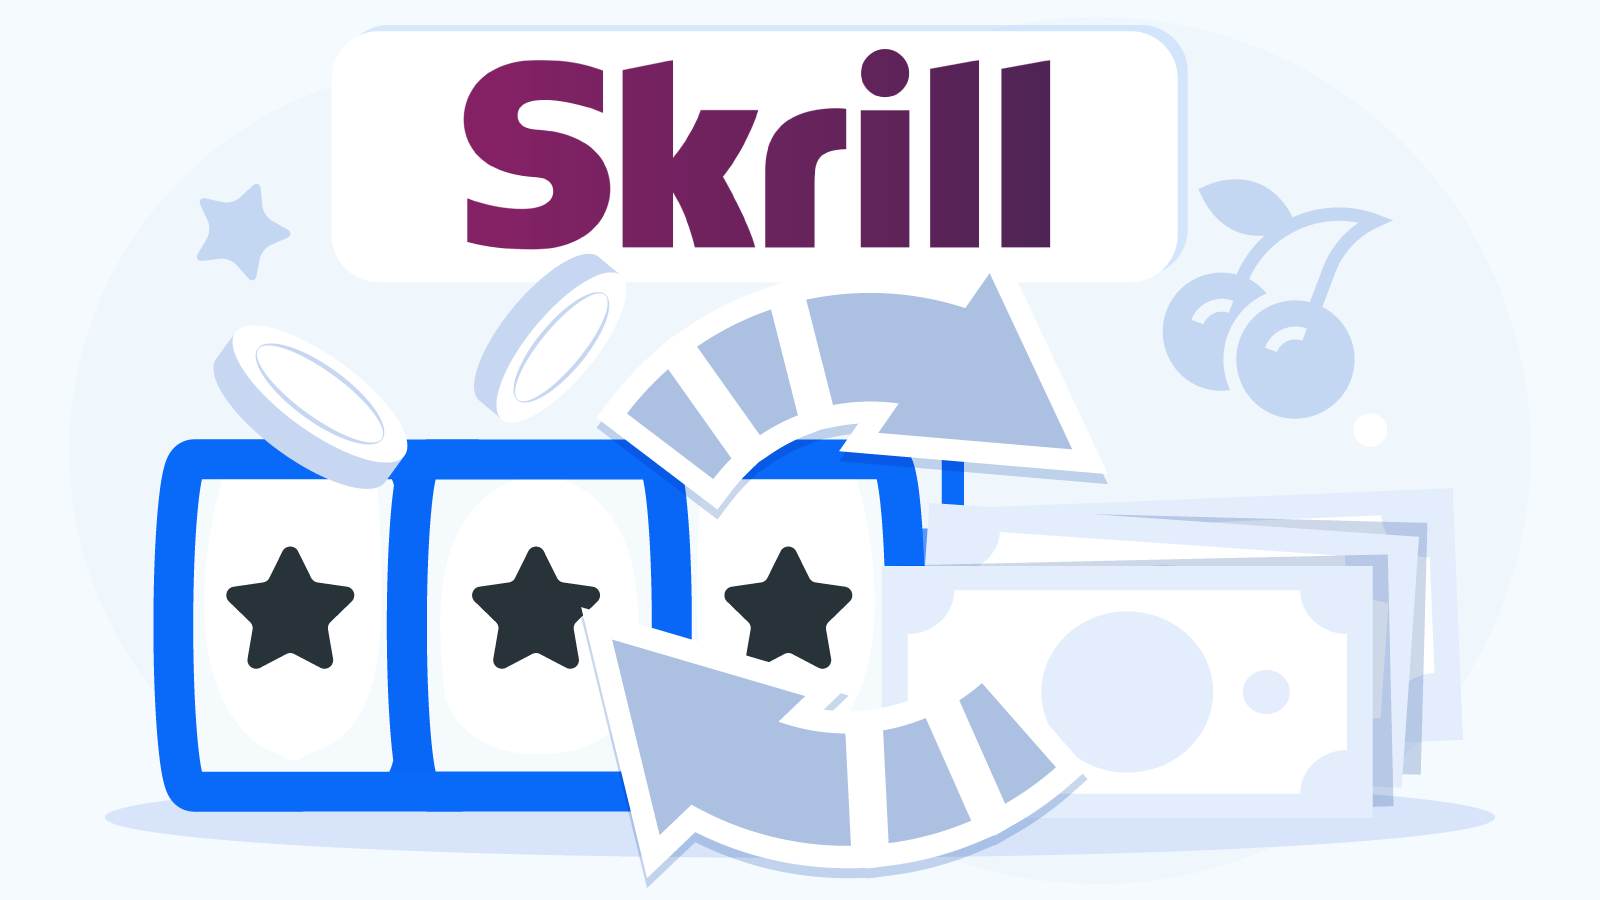 How to Deposit and Withdraw Using a Skrill Account